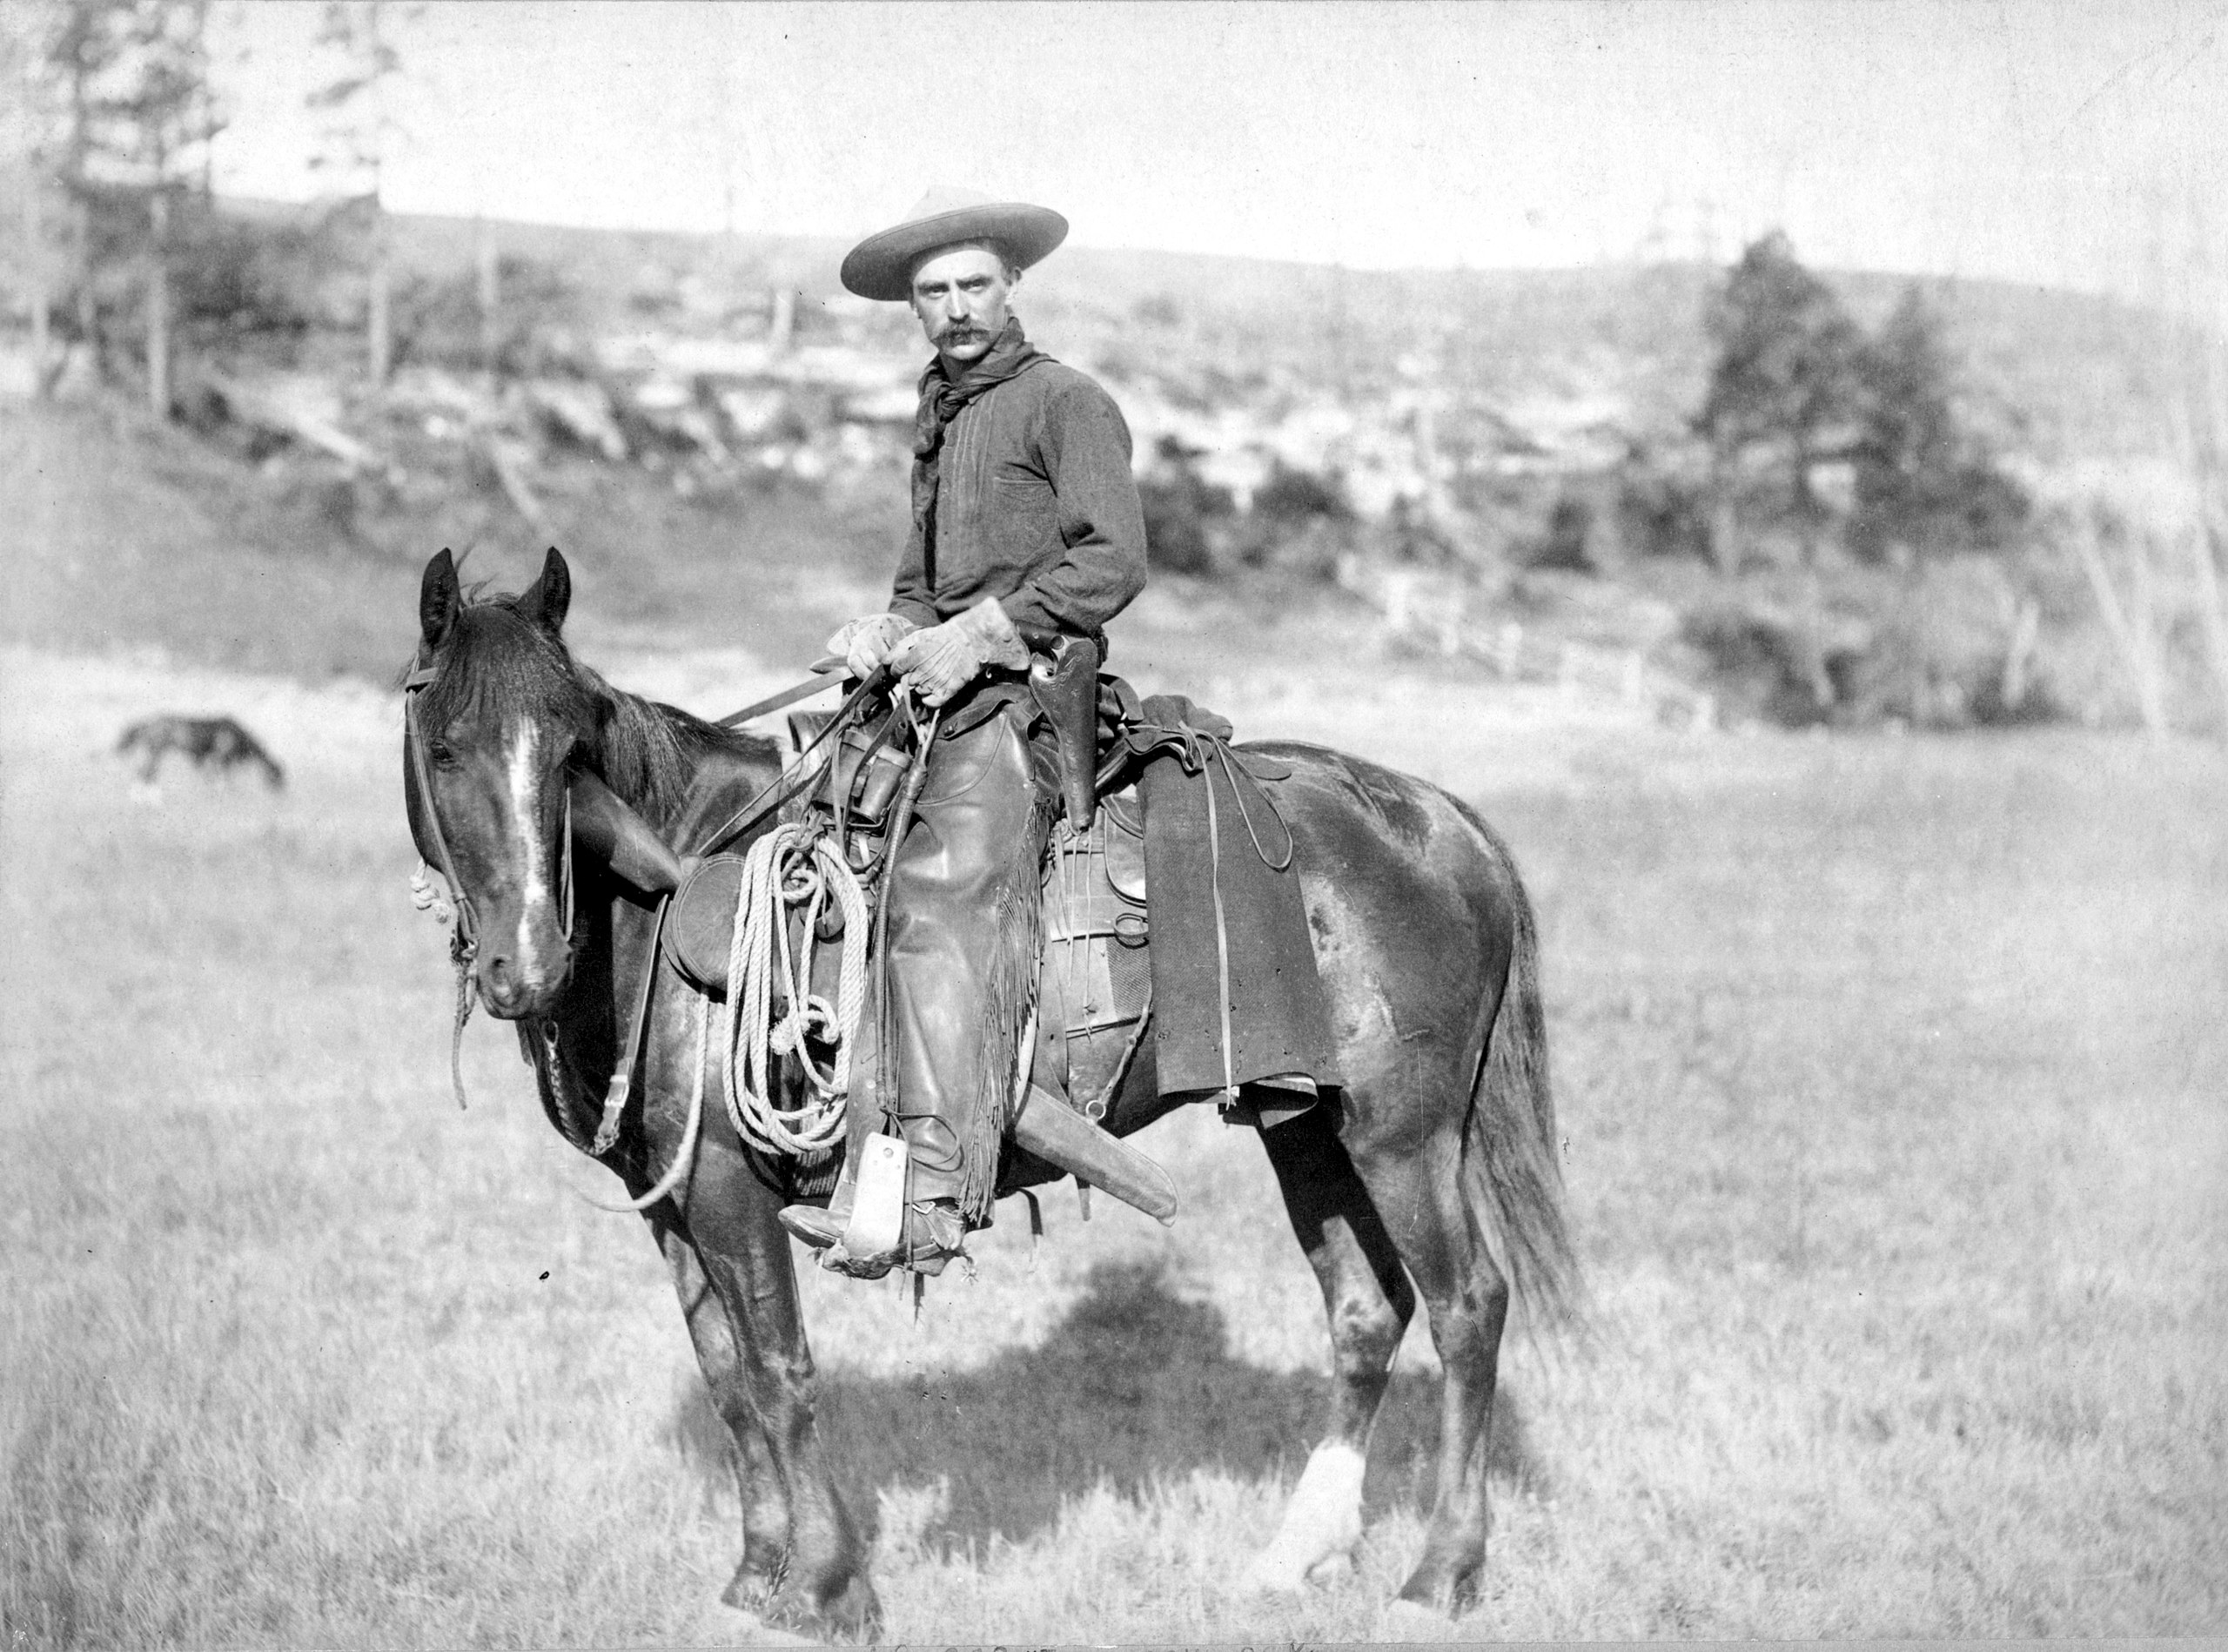 A black-and-white photo of a man on a horse